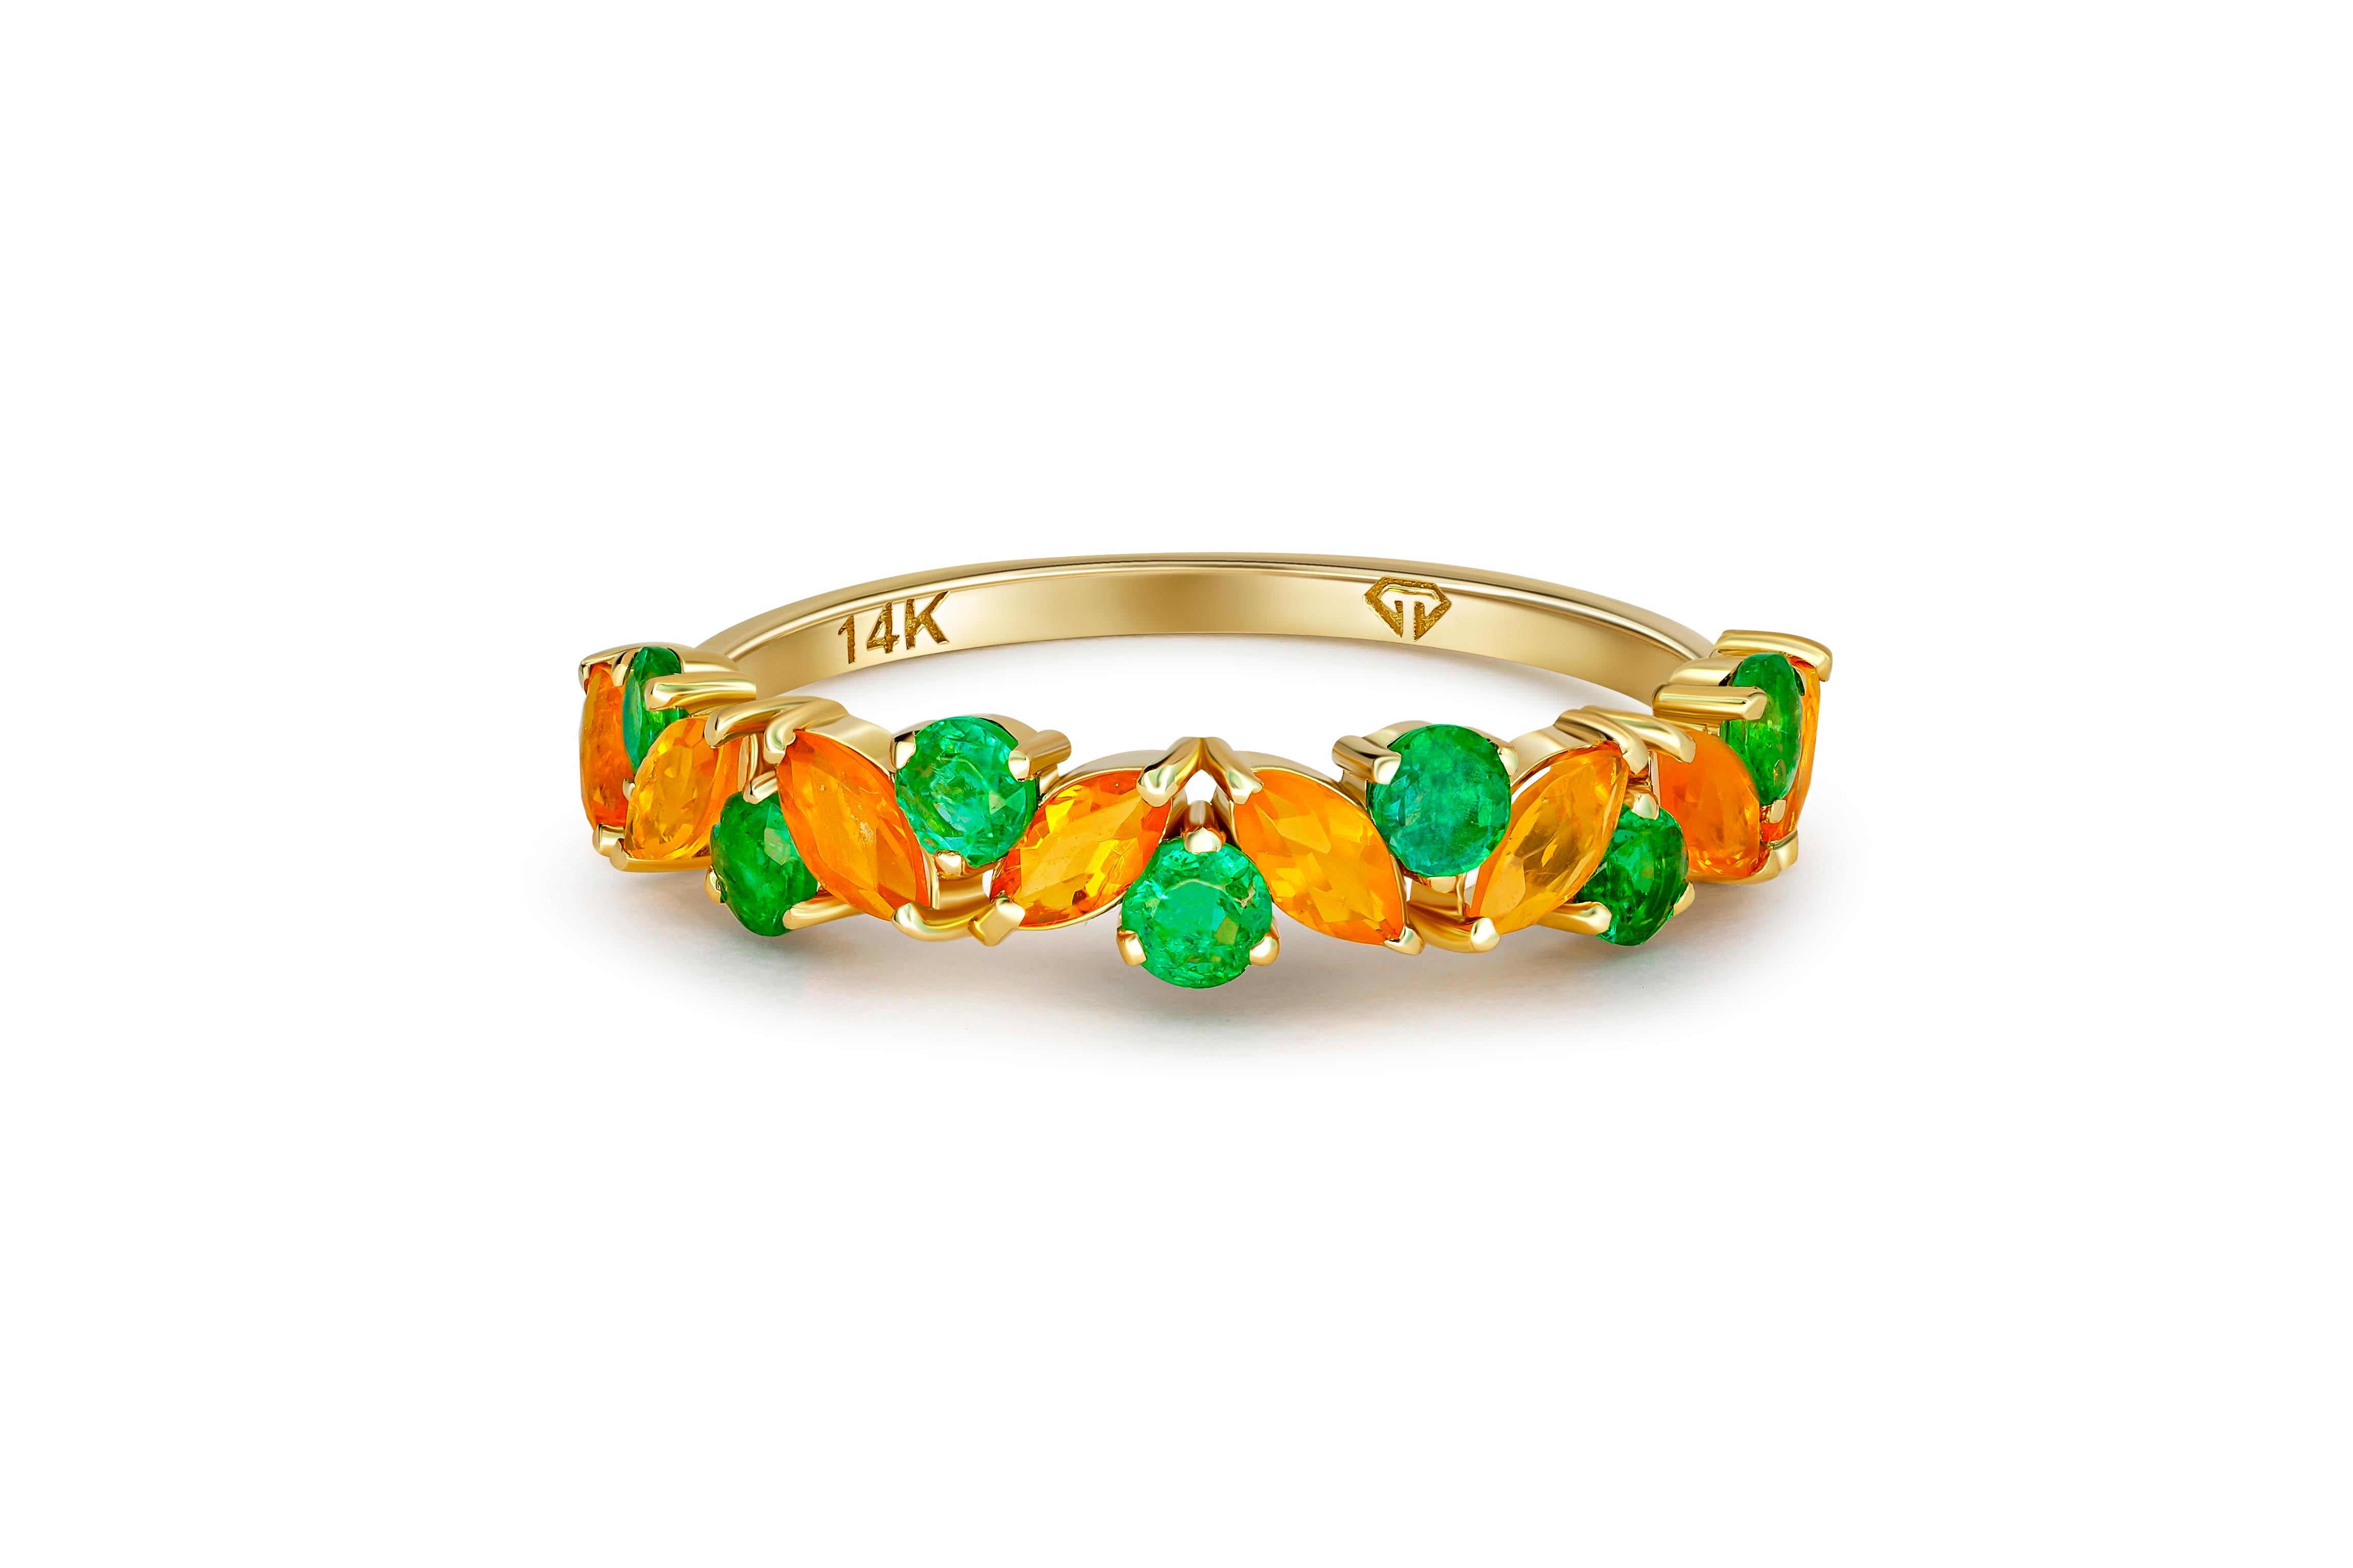 Semi eternity gold ring with opals, emeralds. 
Mexican opal gold ring. Half eternity opal, emeralds ring. Fire opal ring. Orange opal ring

Metal: 14k gold
Weight: 1.65 g. depends from size

Central stones: Opals
Cut - marquise, weight - 1 ct